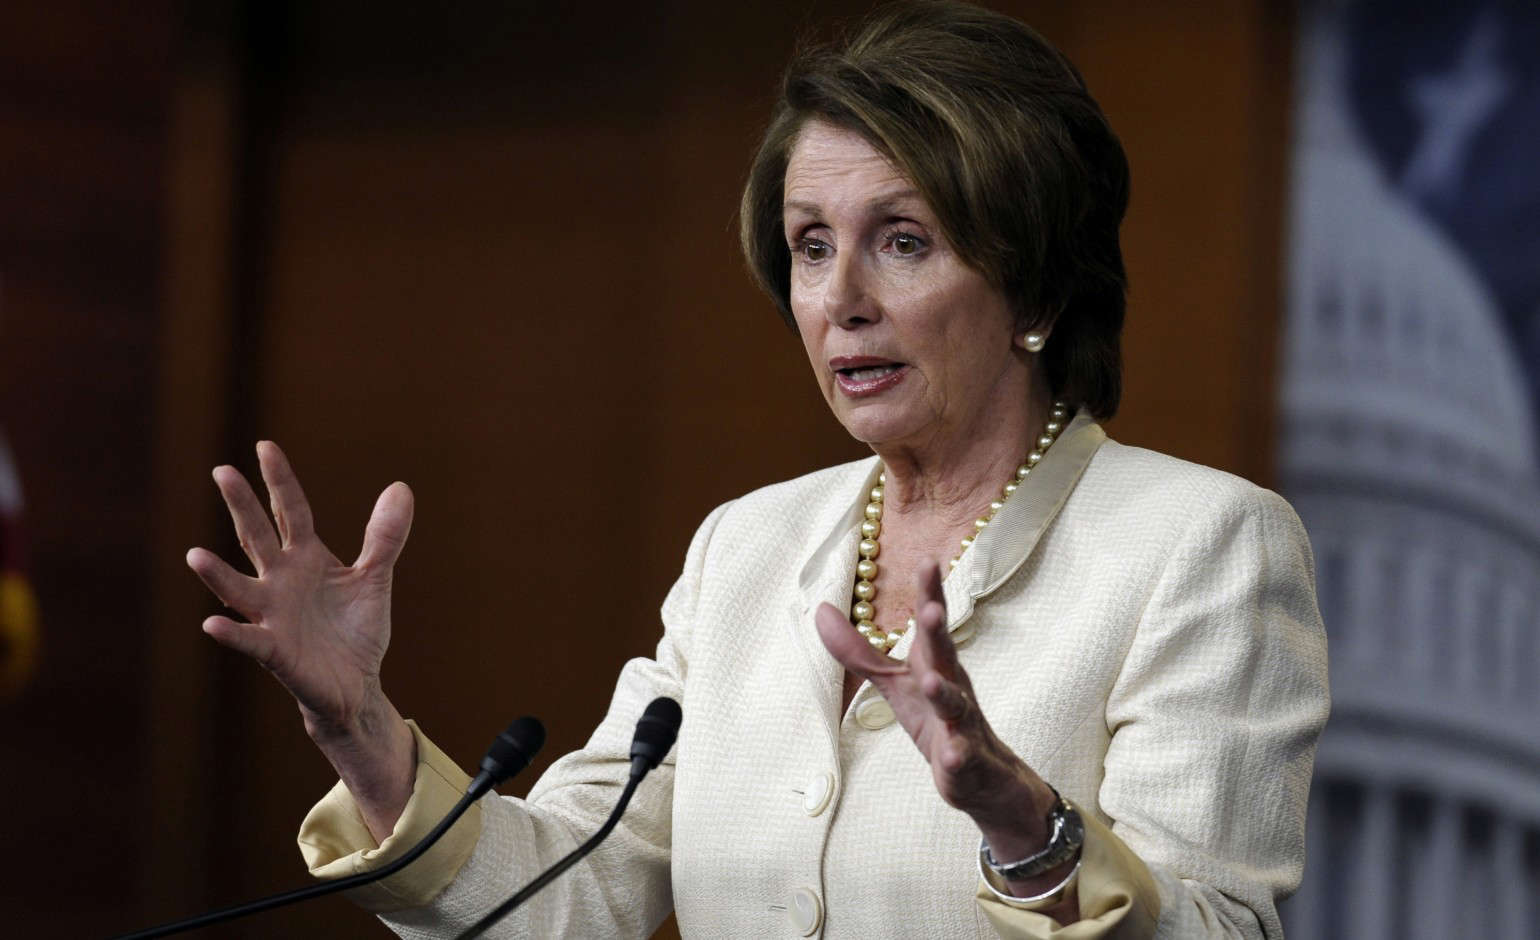 Nancy Pelosi wants to get even richer by investing in the companies she subsidizes and regulates